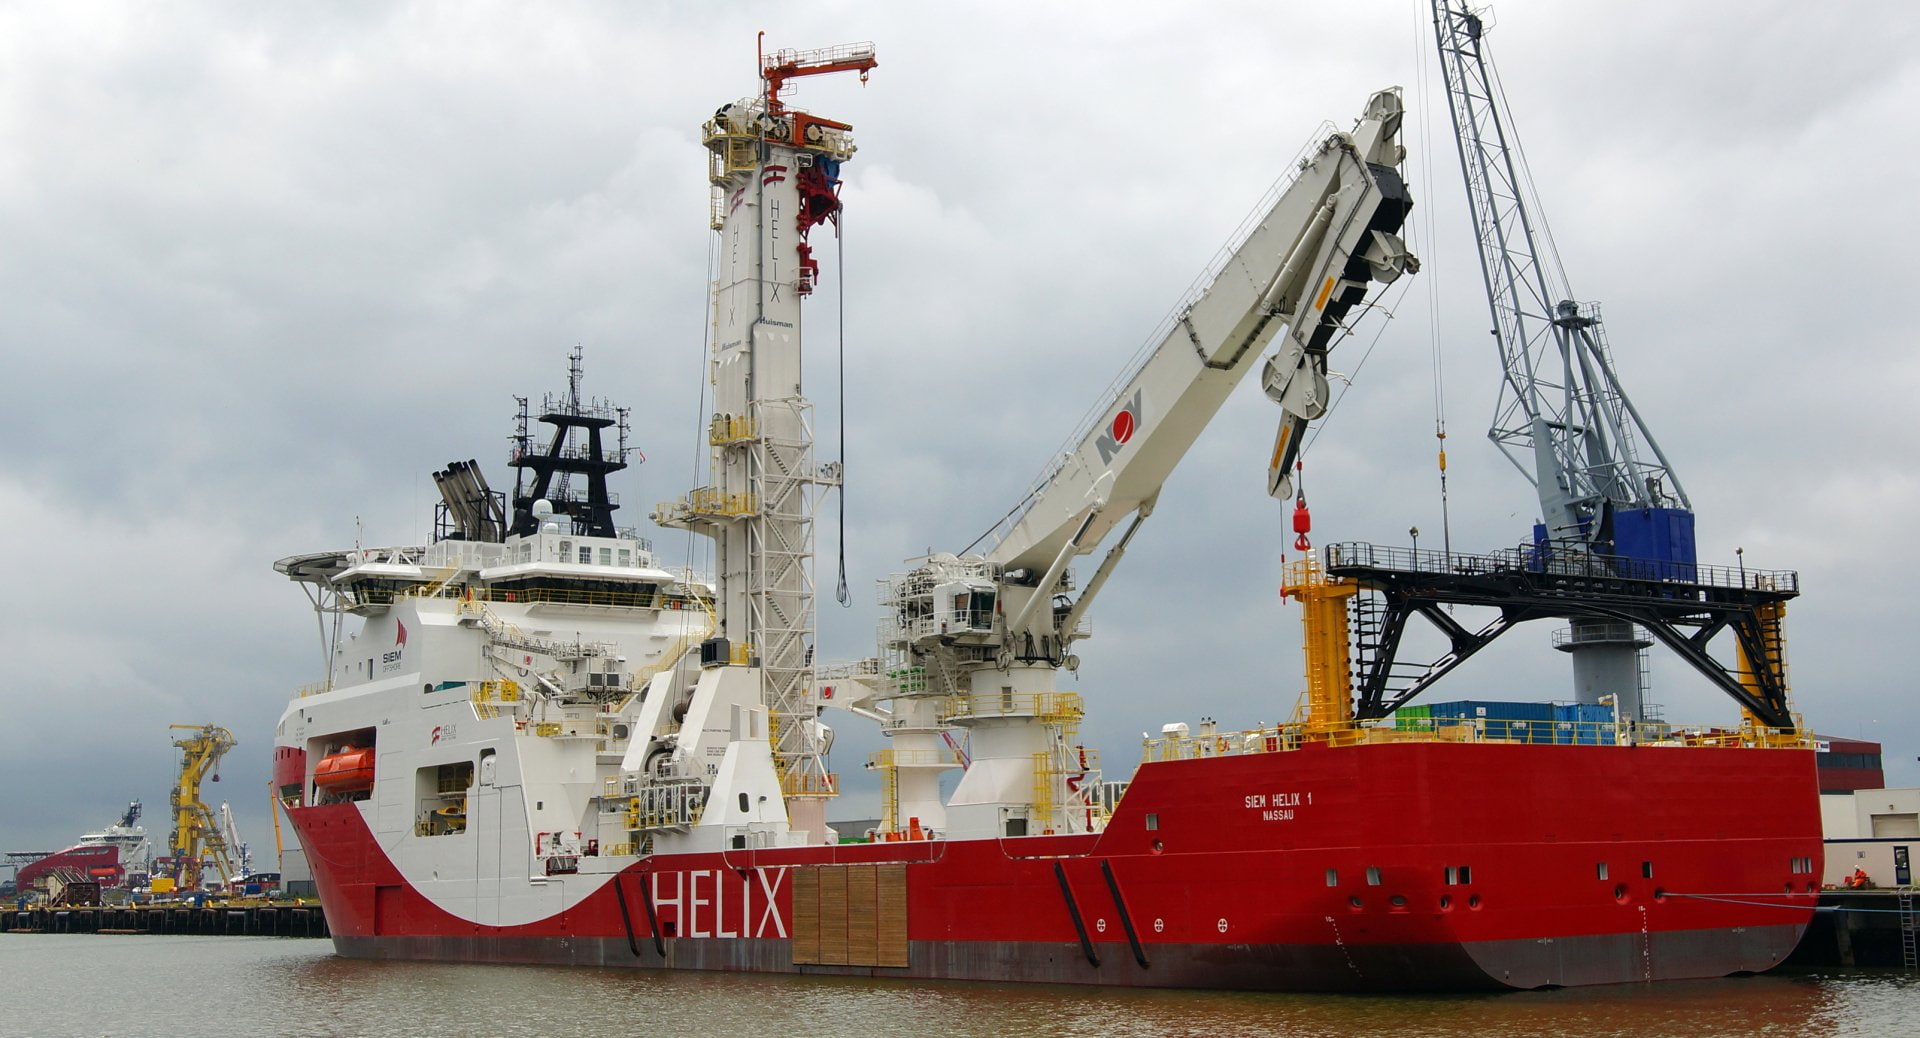 Vehicles, Offshore Support Vessel, Ship, Siem Helix 1